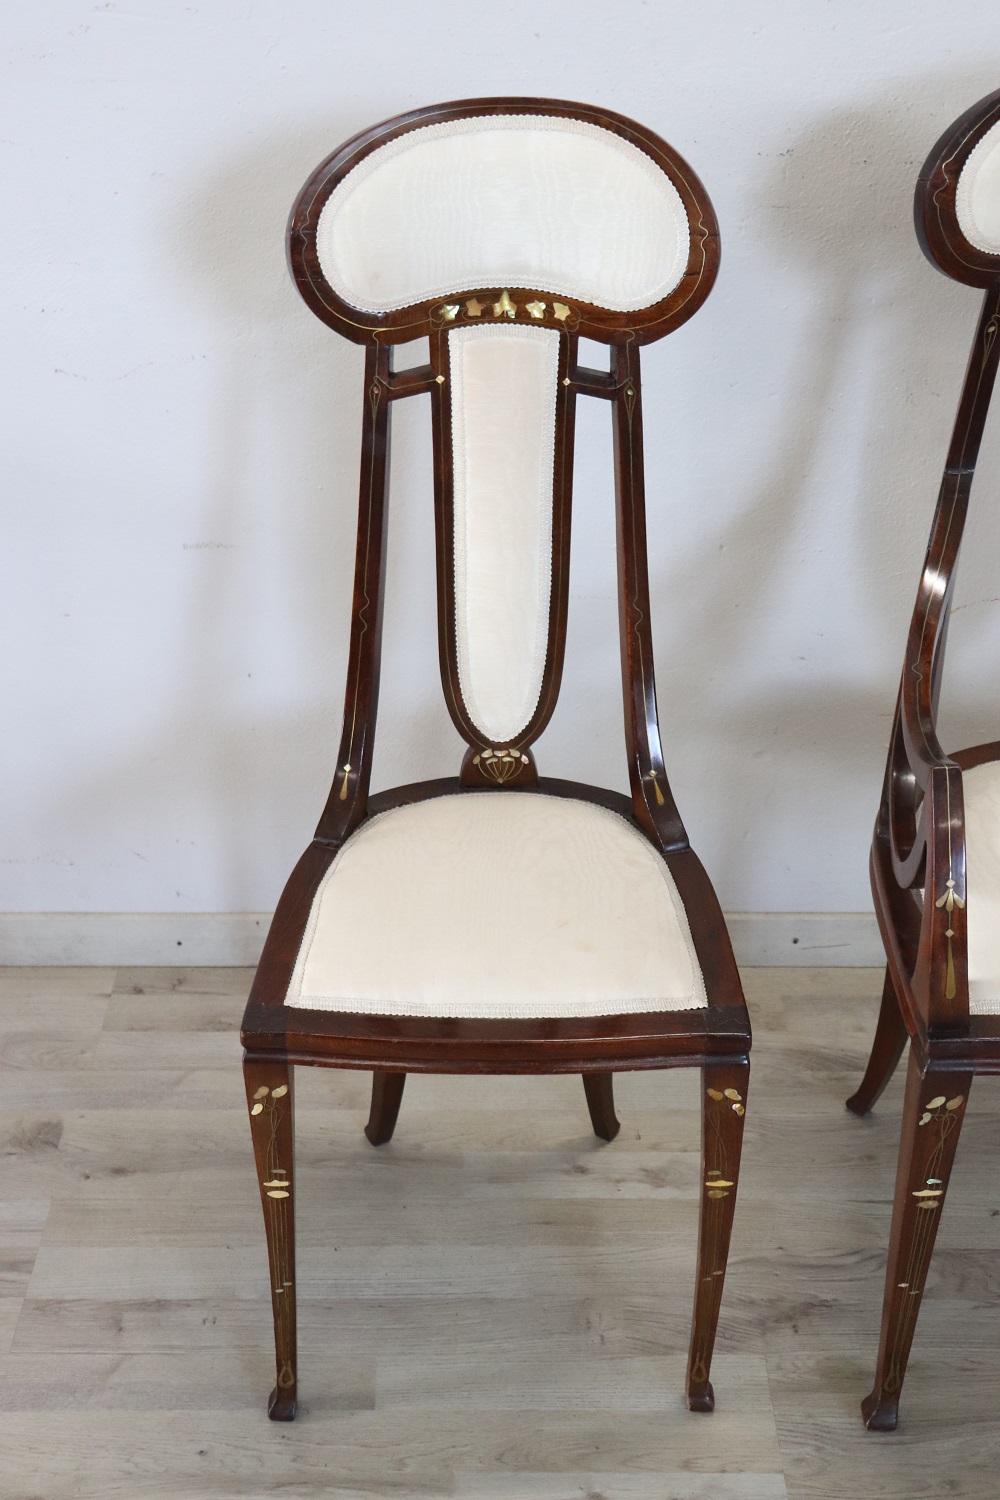 Inlay Spectacular Italian Art Nouveau Set of Armchair and 2 Chiars by Carlo Zen 1902s For Sale